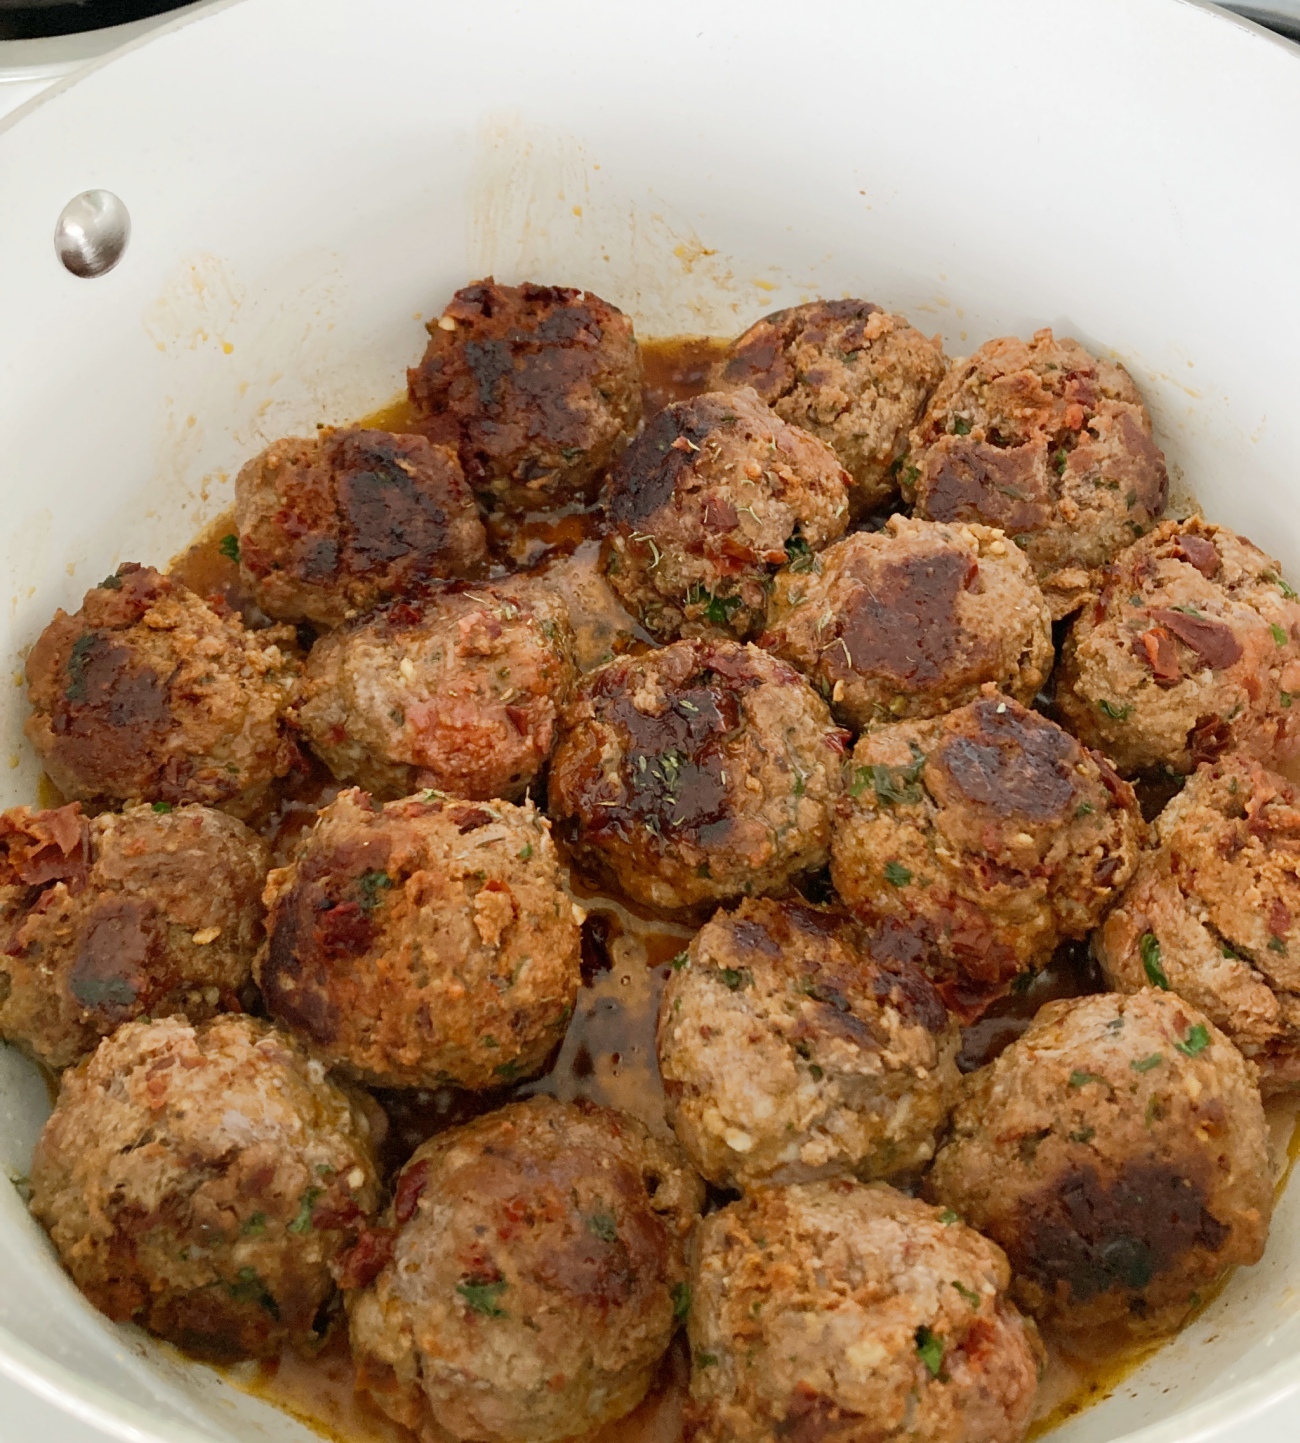 Heat olive oil in large skillet on medium. Add meatballs and cook 4-5 minutes each side.